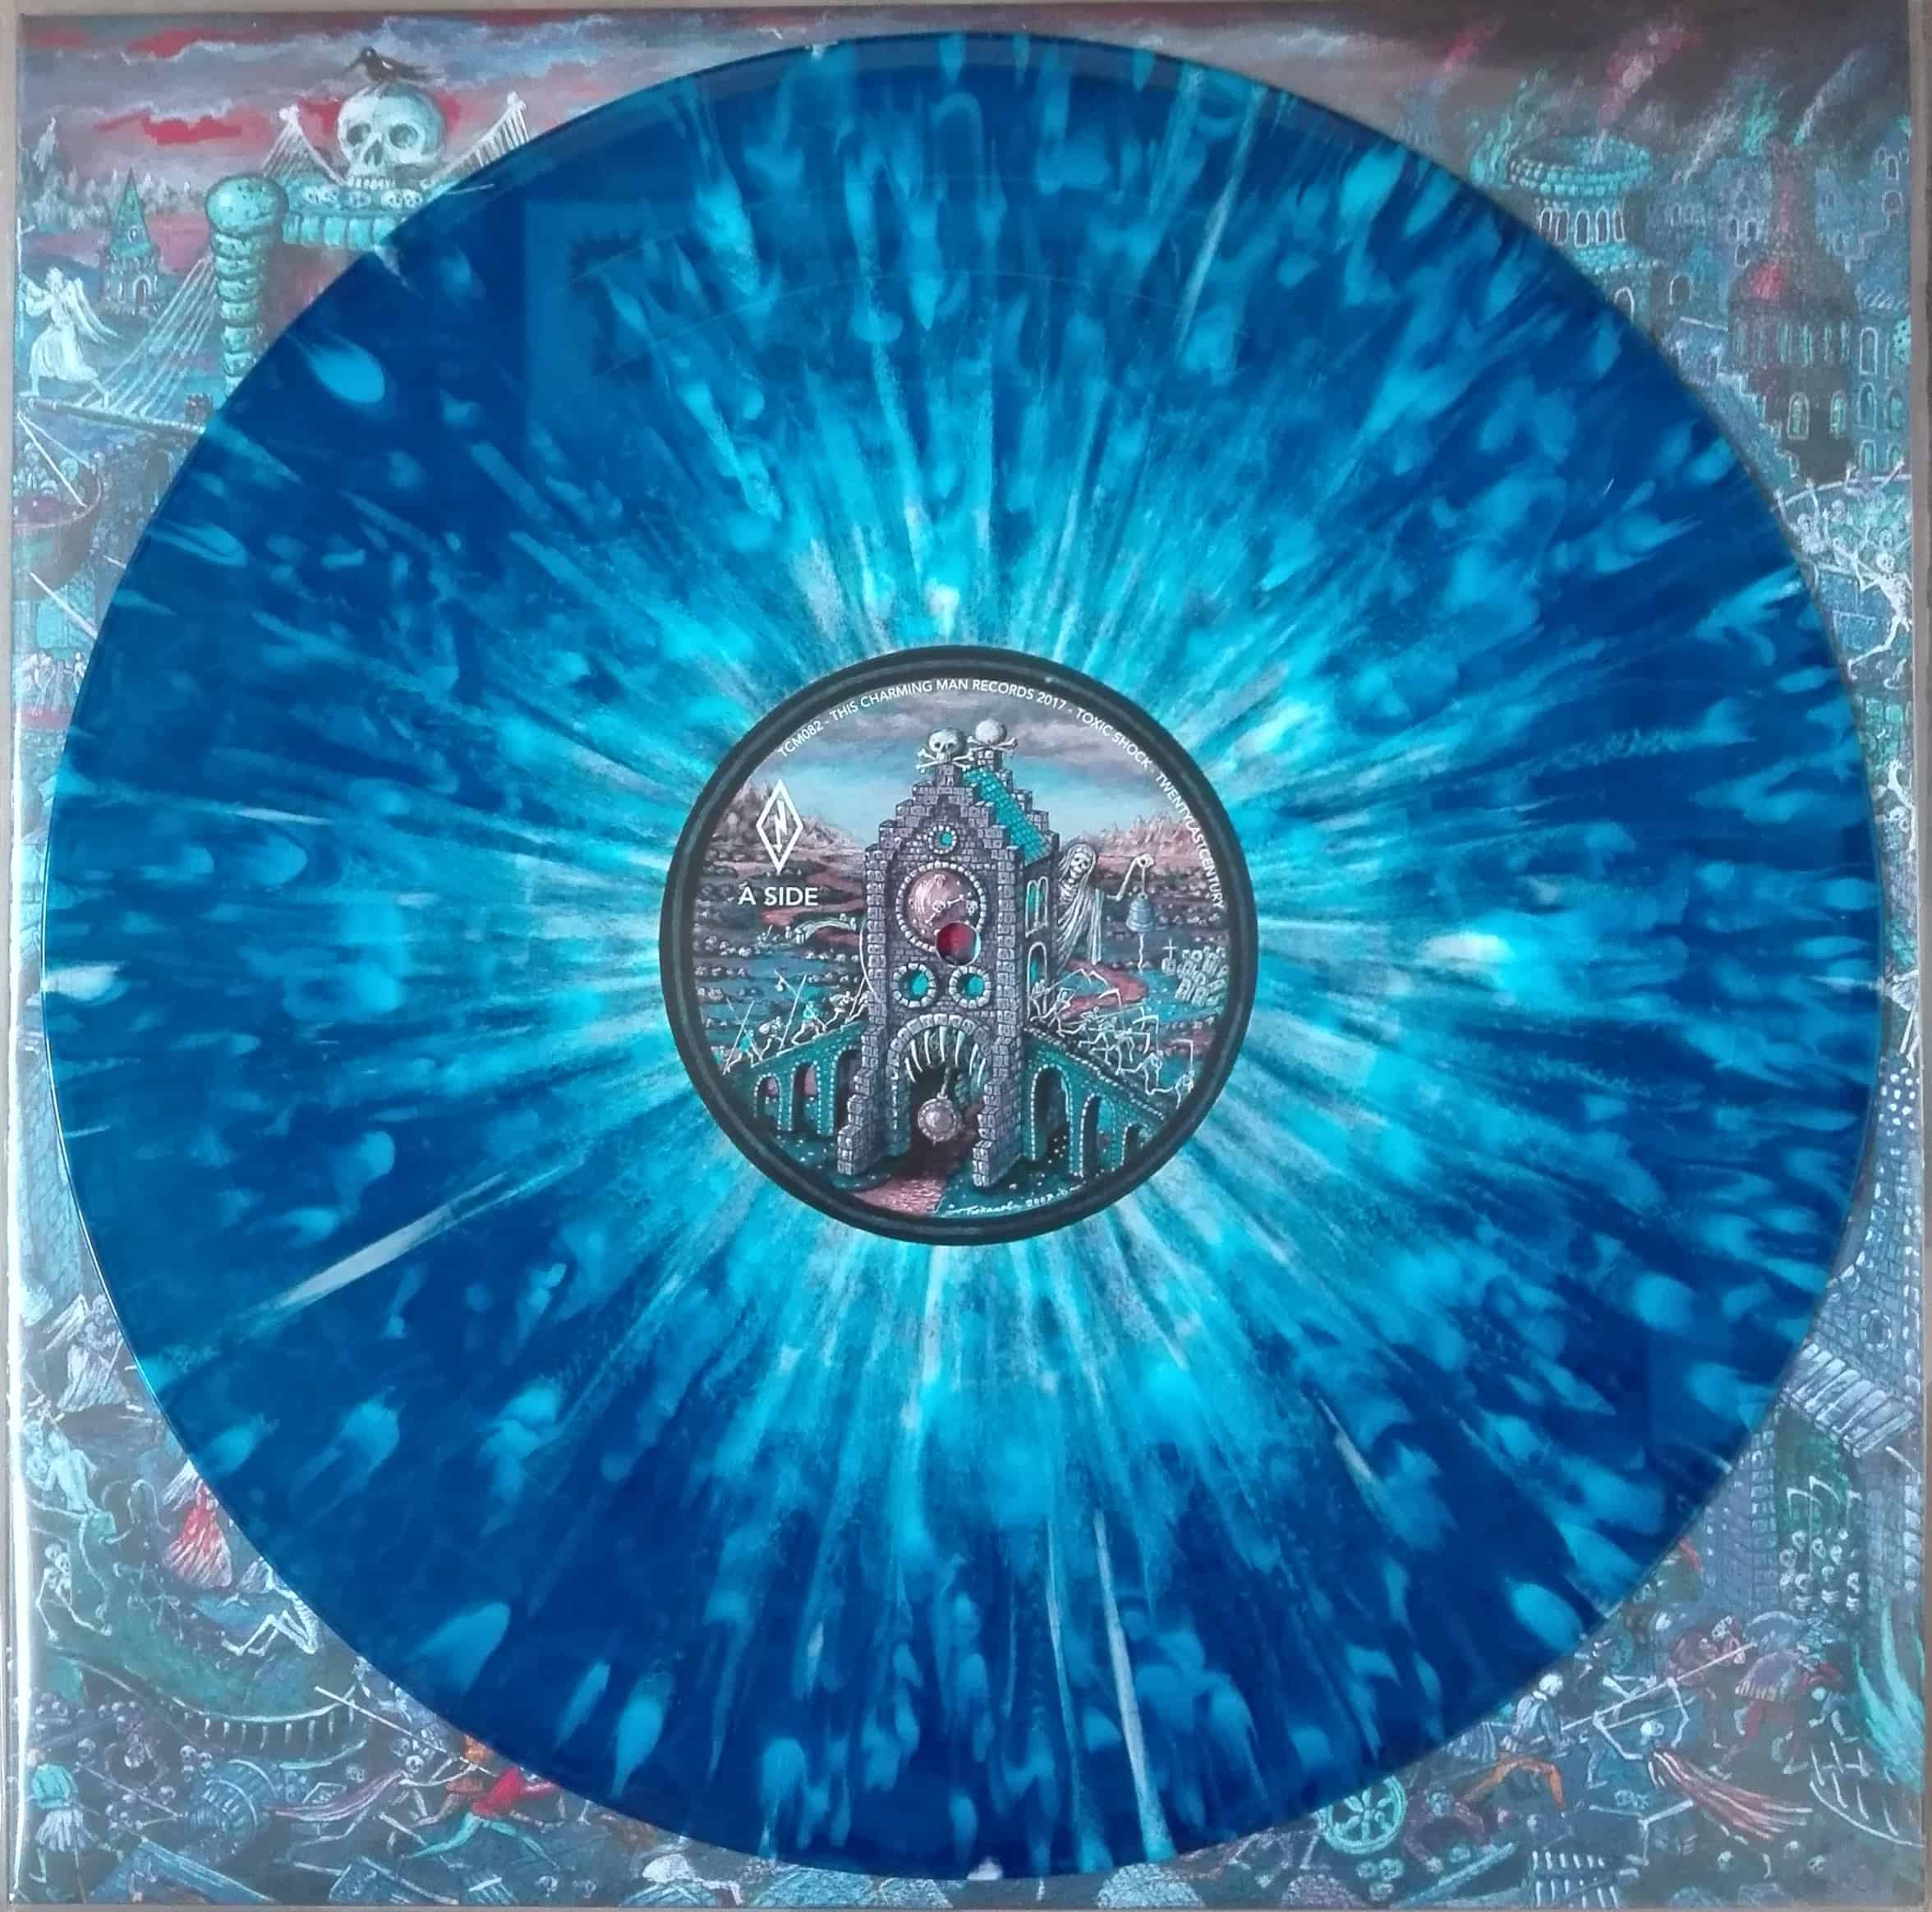 Toxic Shock - TwentyLastCentury LP/CD Pressing Info: 1st press: 125x white (mailorder exclusive), 375x clear blue w/ white splatter (LAST COPIES) 2nd press: 500x black all covers with UV spot gloss finish! CD comes in nice gatefold digipack incl. big poster!